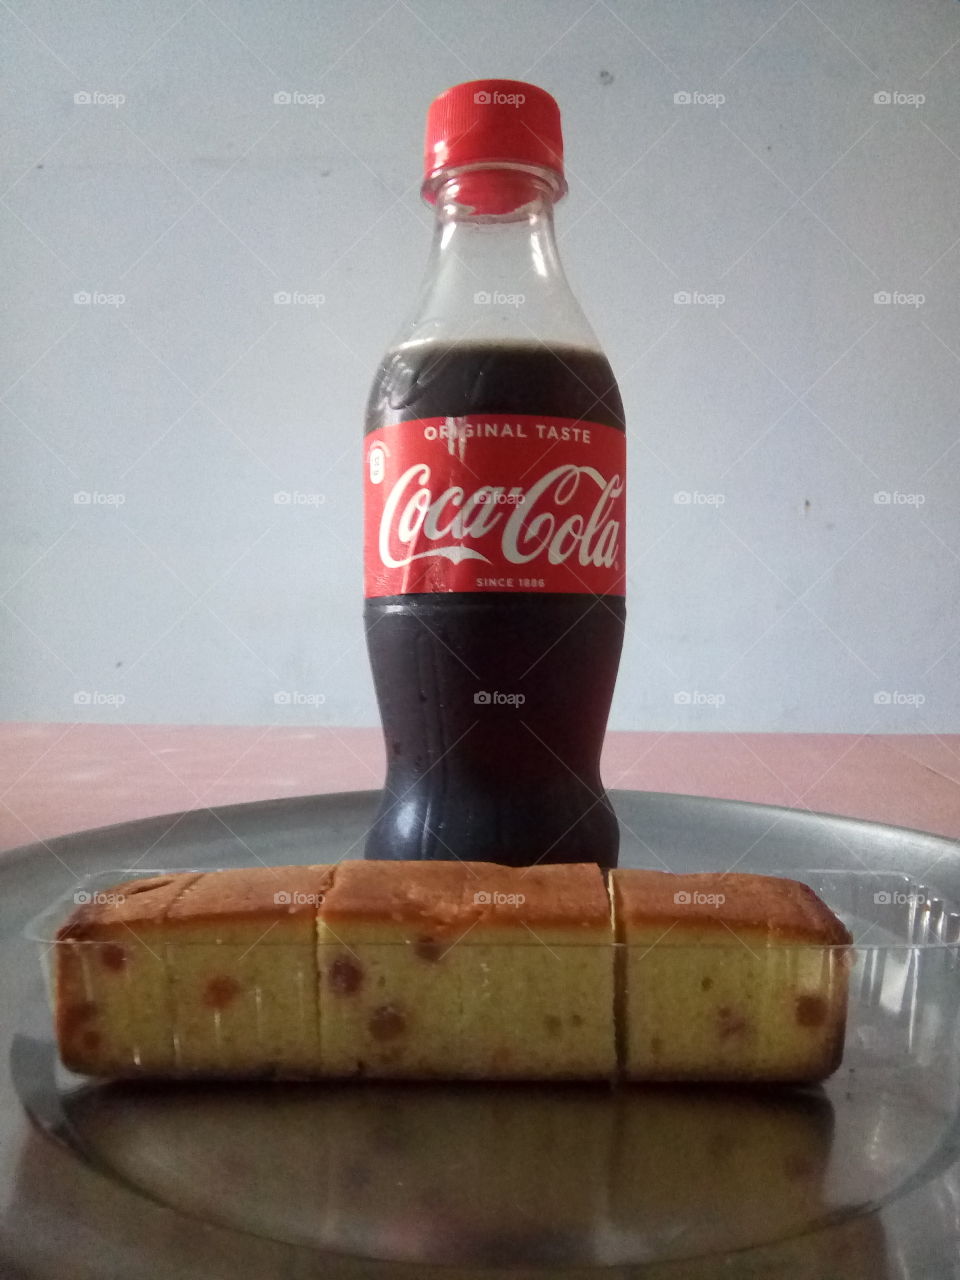 cakes with coca cola feels very tasty.